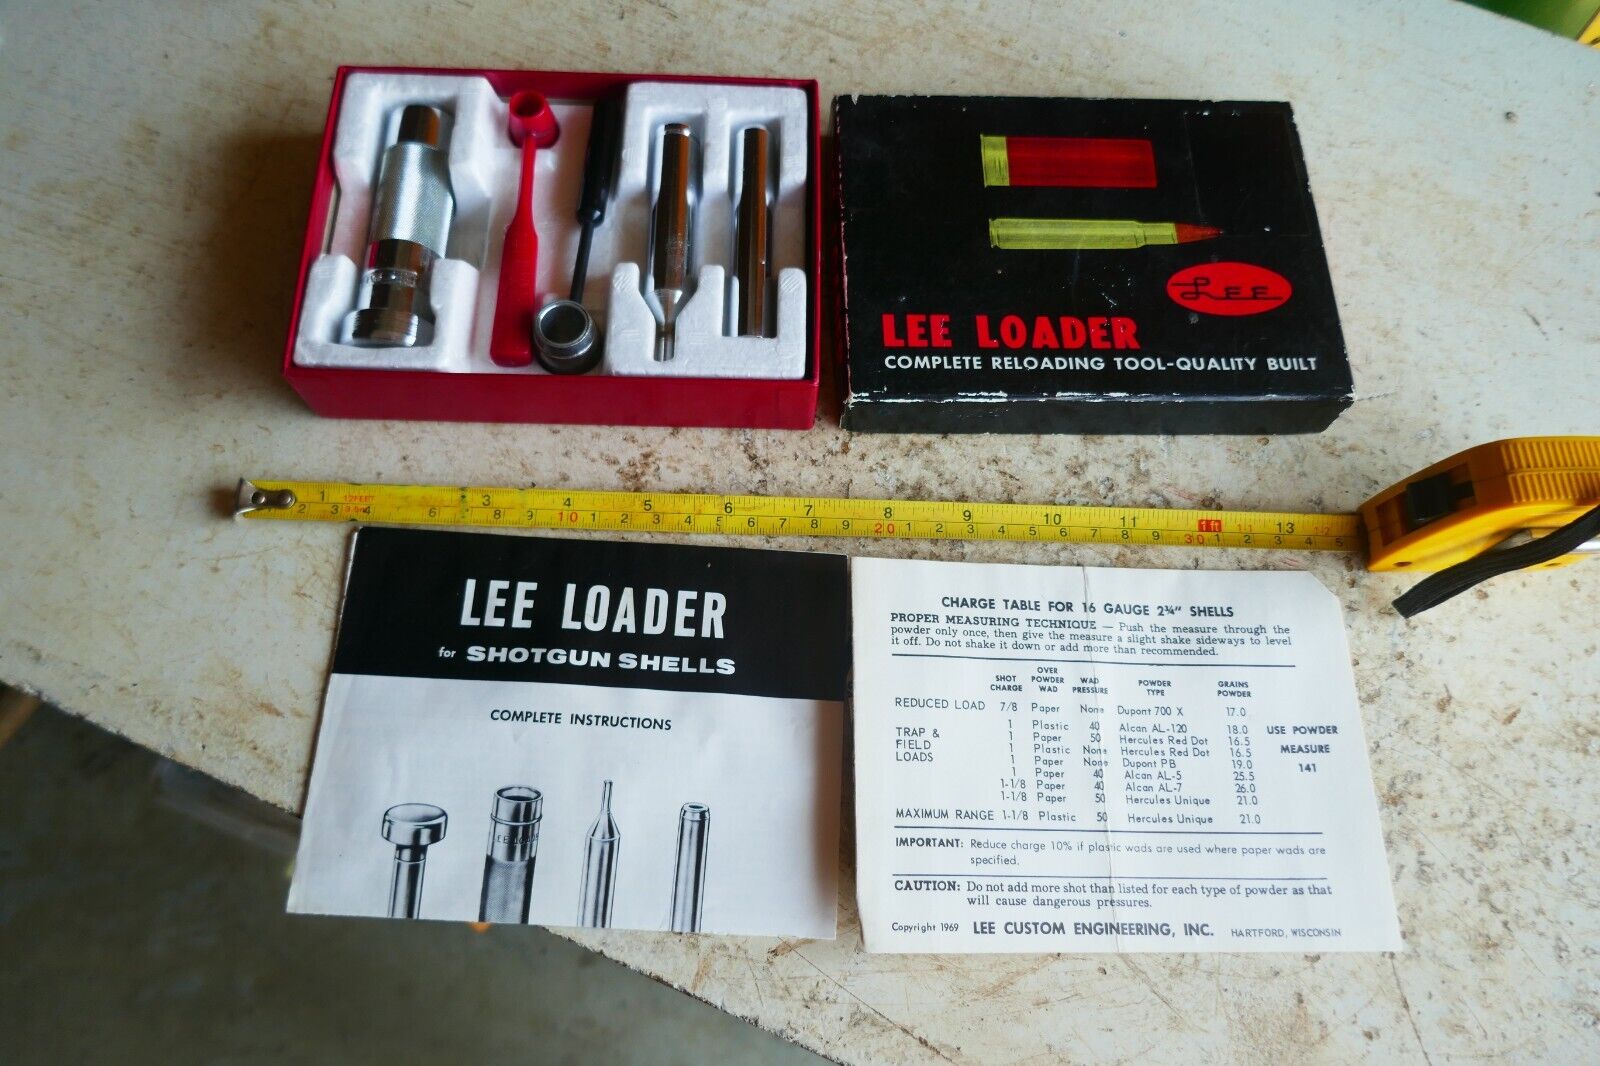 Preowned Nice Condition Lee Loader Reloading Tool Kit 16 Gauge Lot 24-18-5